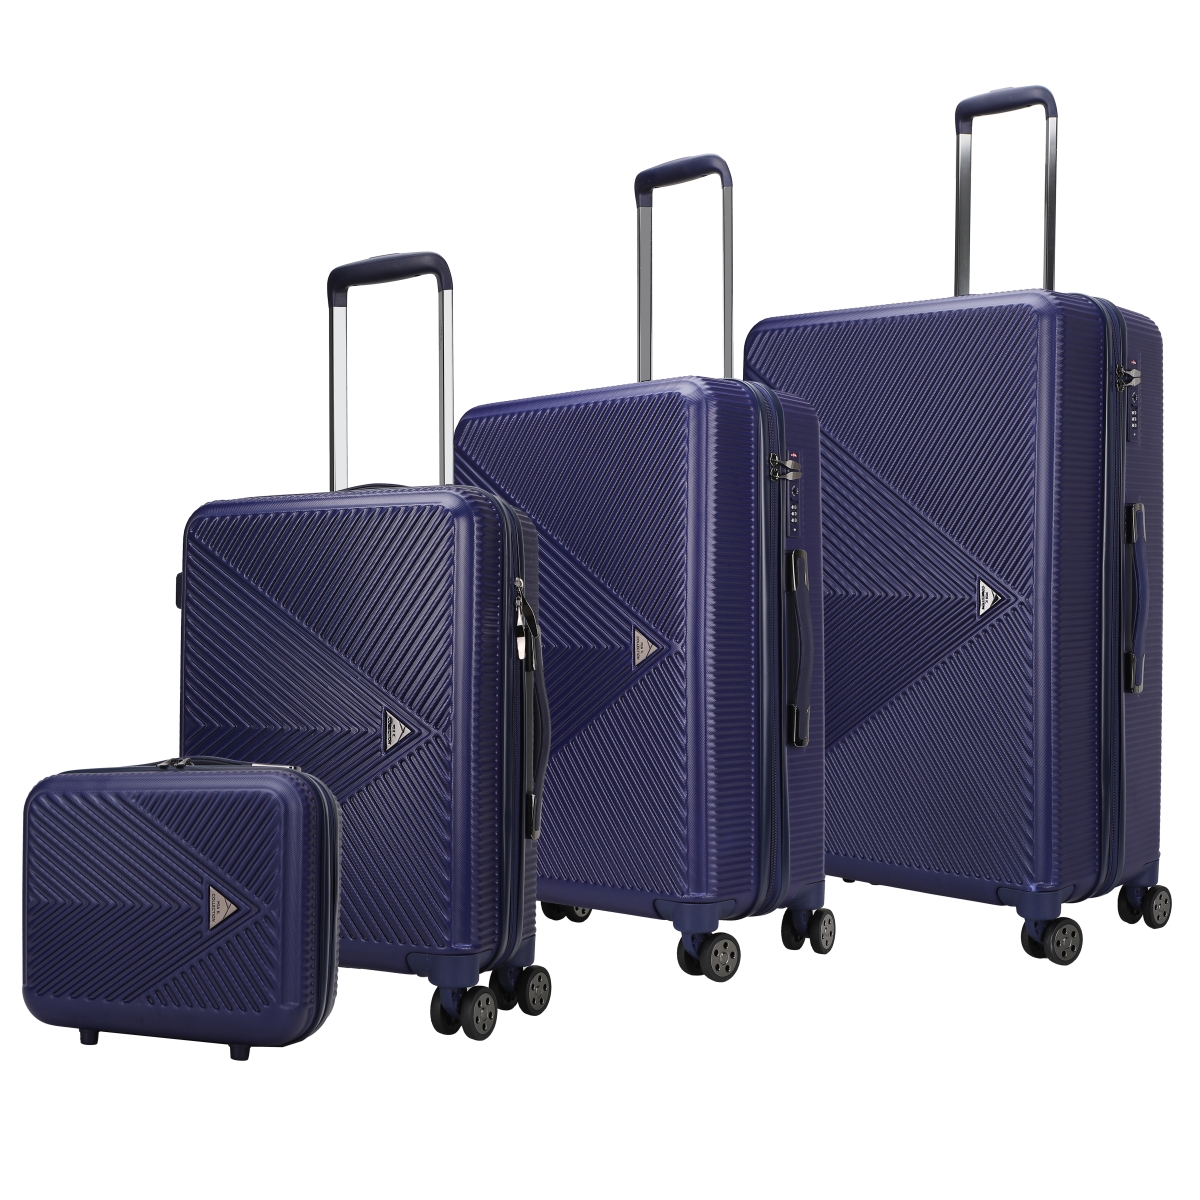 Picture of MKF Collection by Mia K. MKF-F204NV-4 Felicity Luggage Set by Mia K- 4-piece set